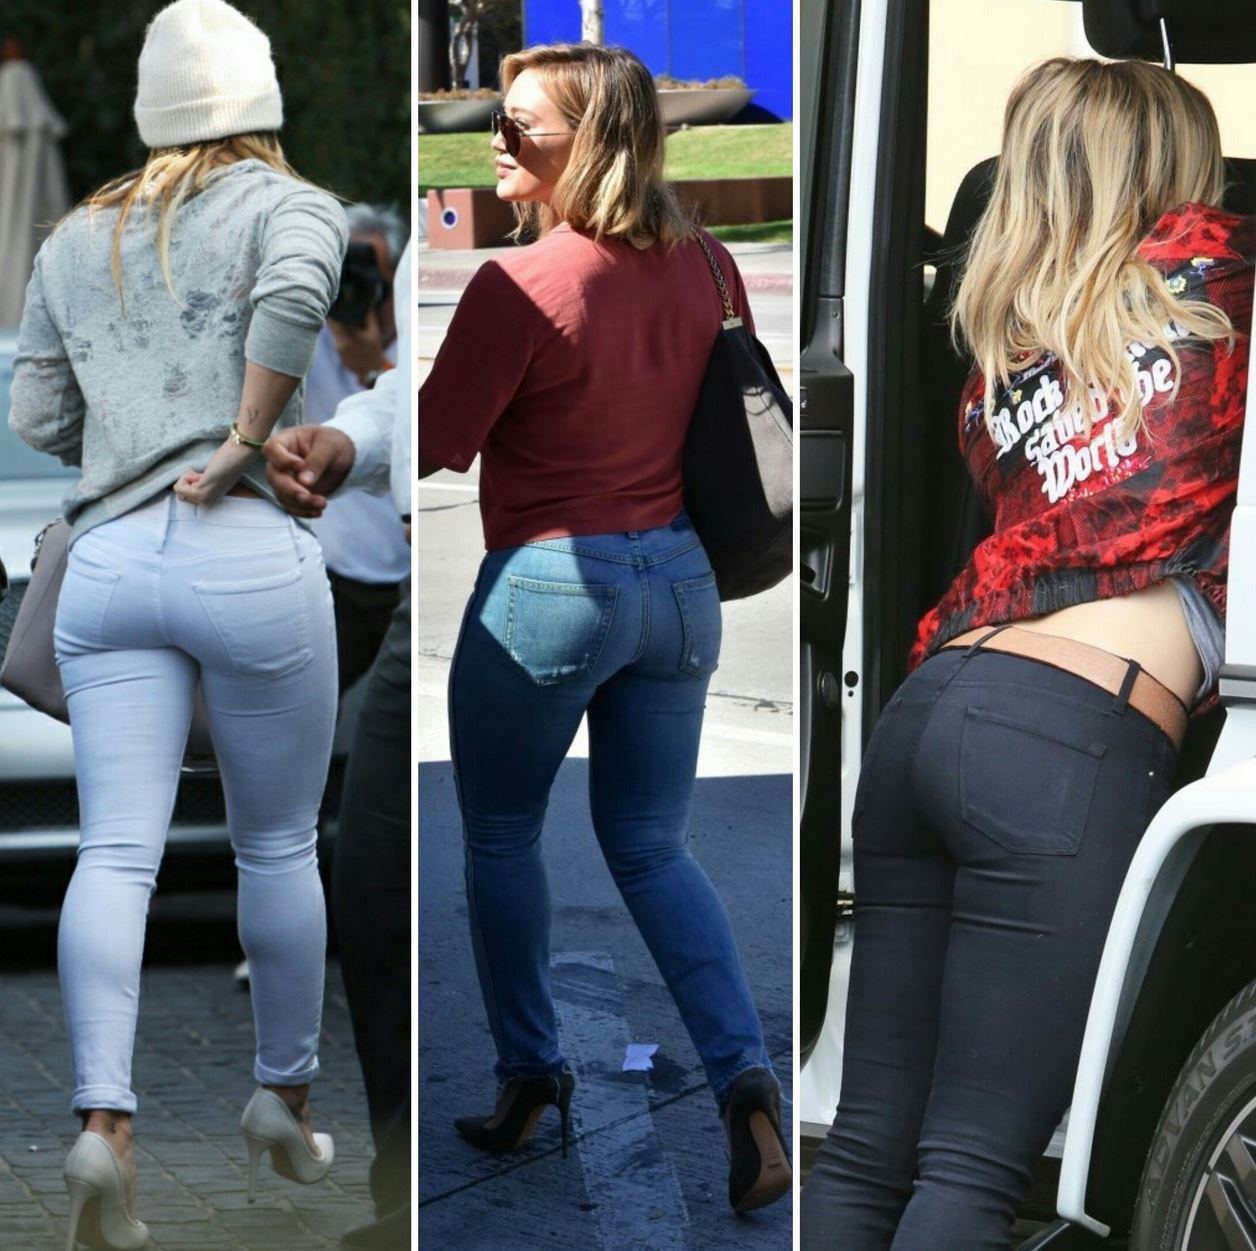 Cheers - hilary duff ass in jeans